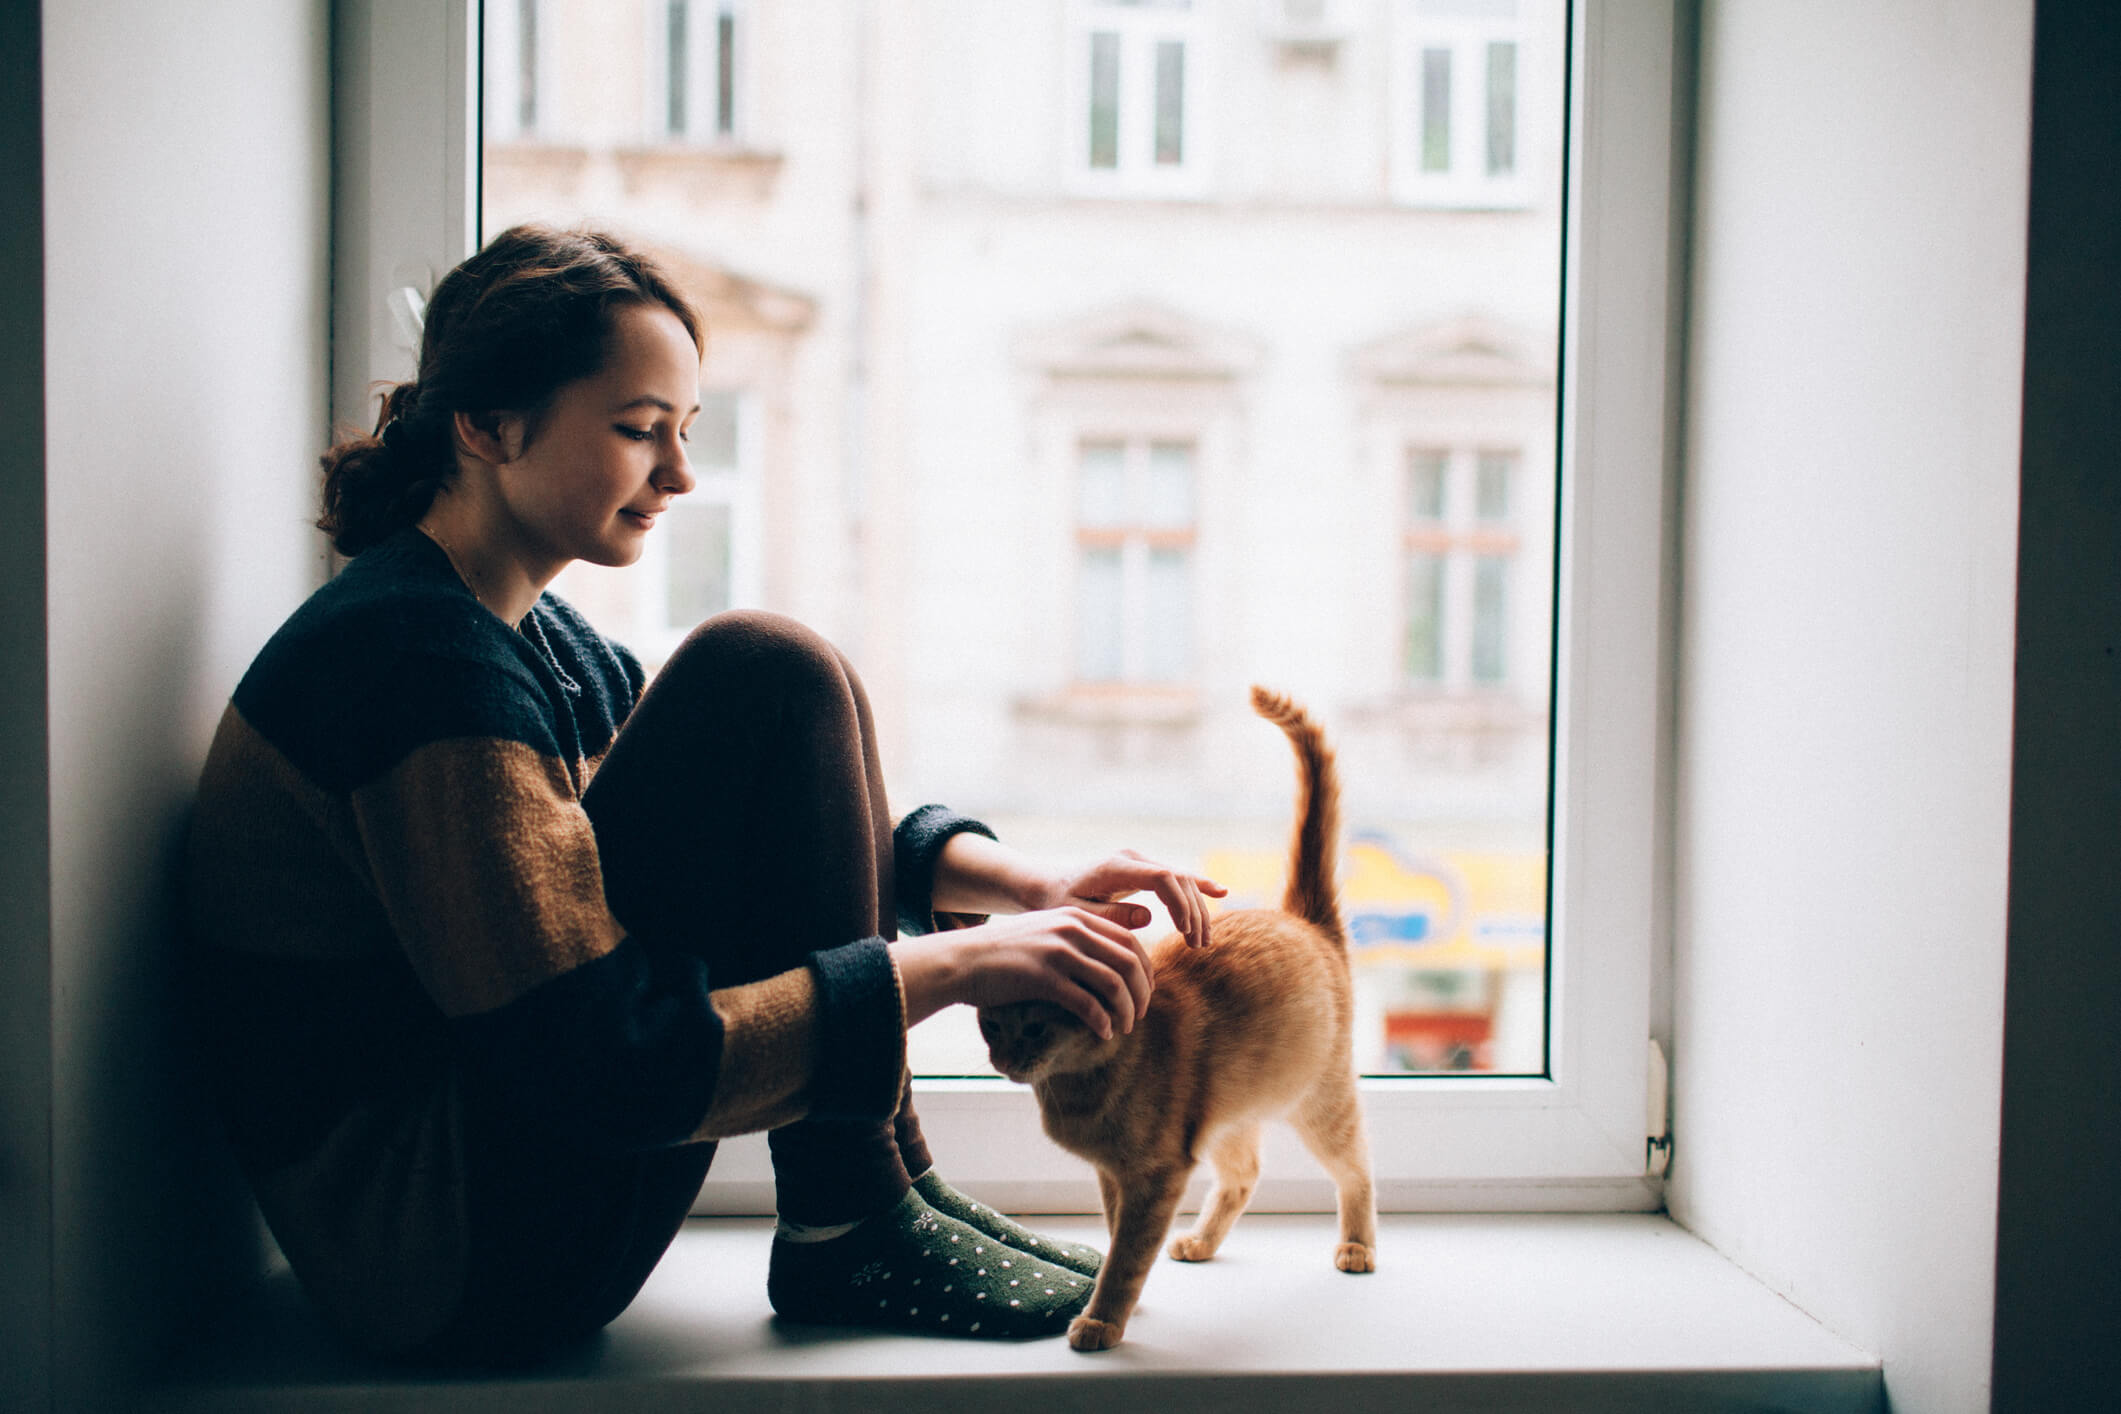 Young woman pets her orange tabby kitten on a large window sill overlooking the city